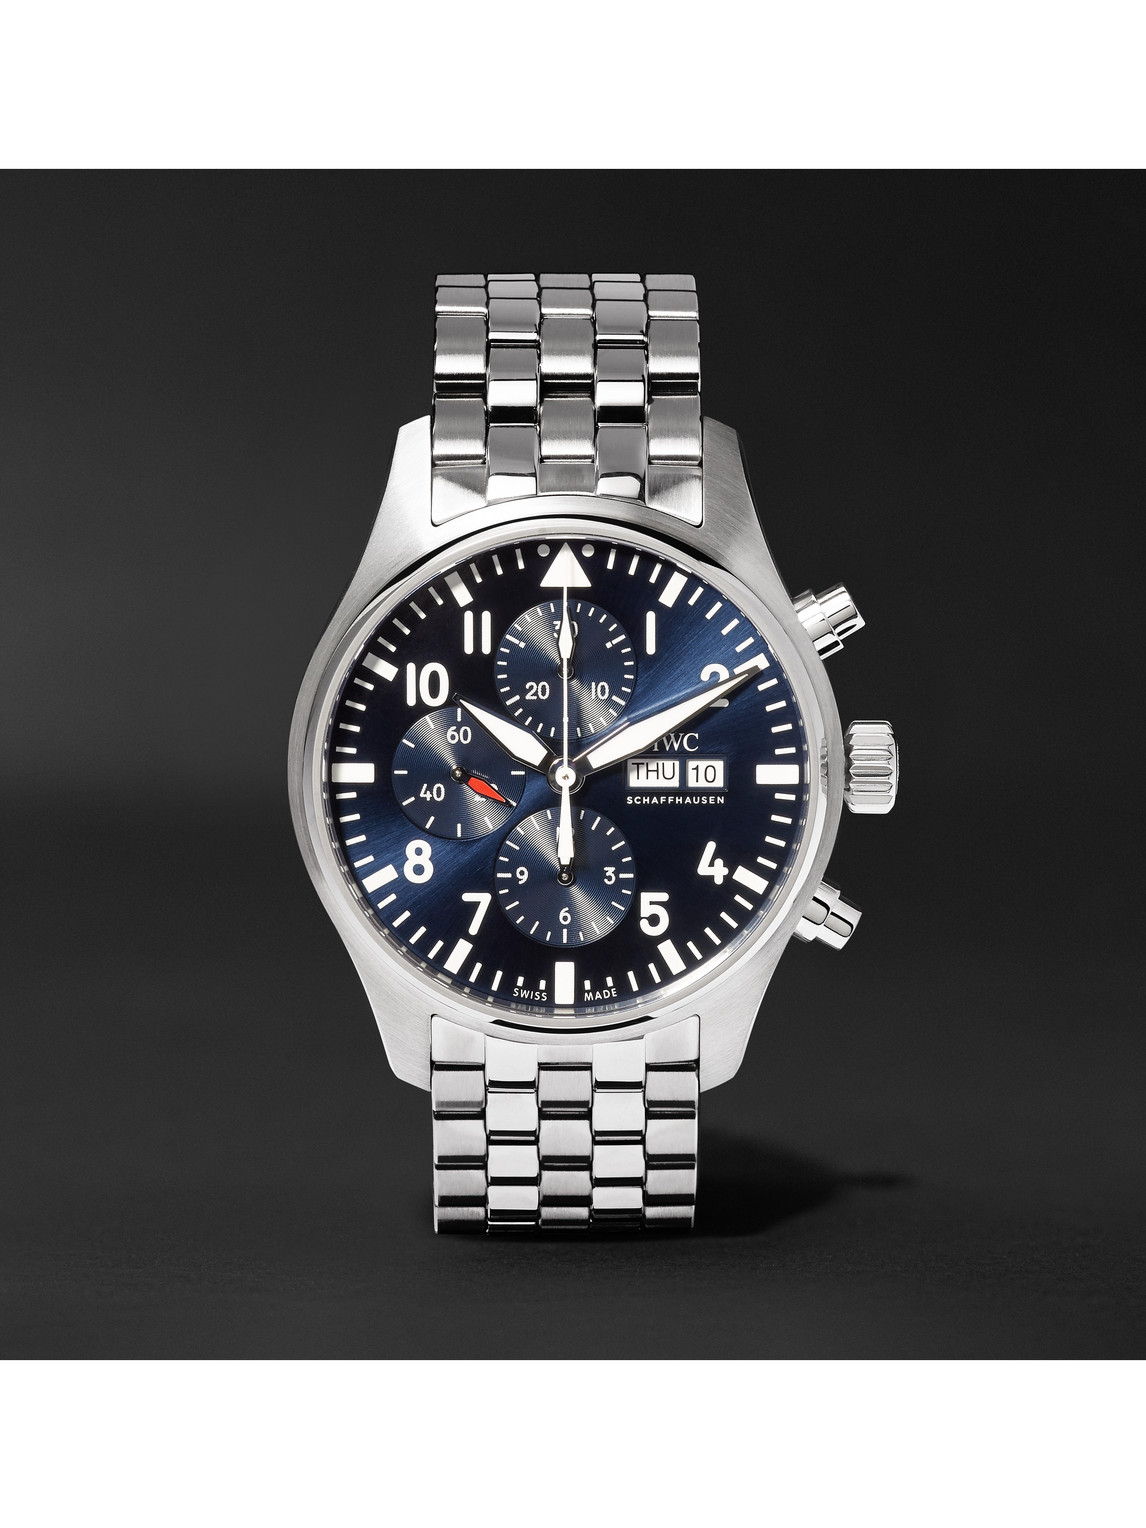 Pilot's Le Petit Prince Edition Chronograph 43mm Stainless Steel Watch, Ref. No. IW377717